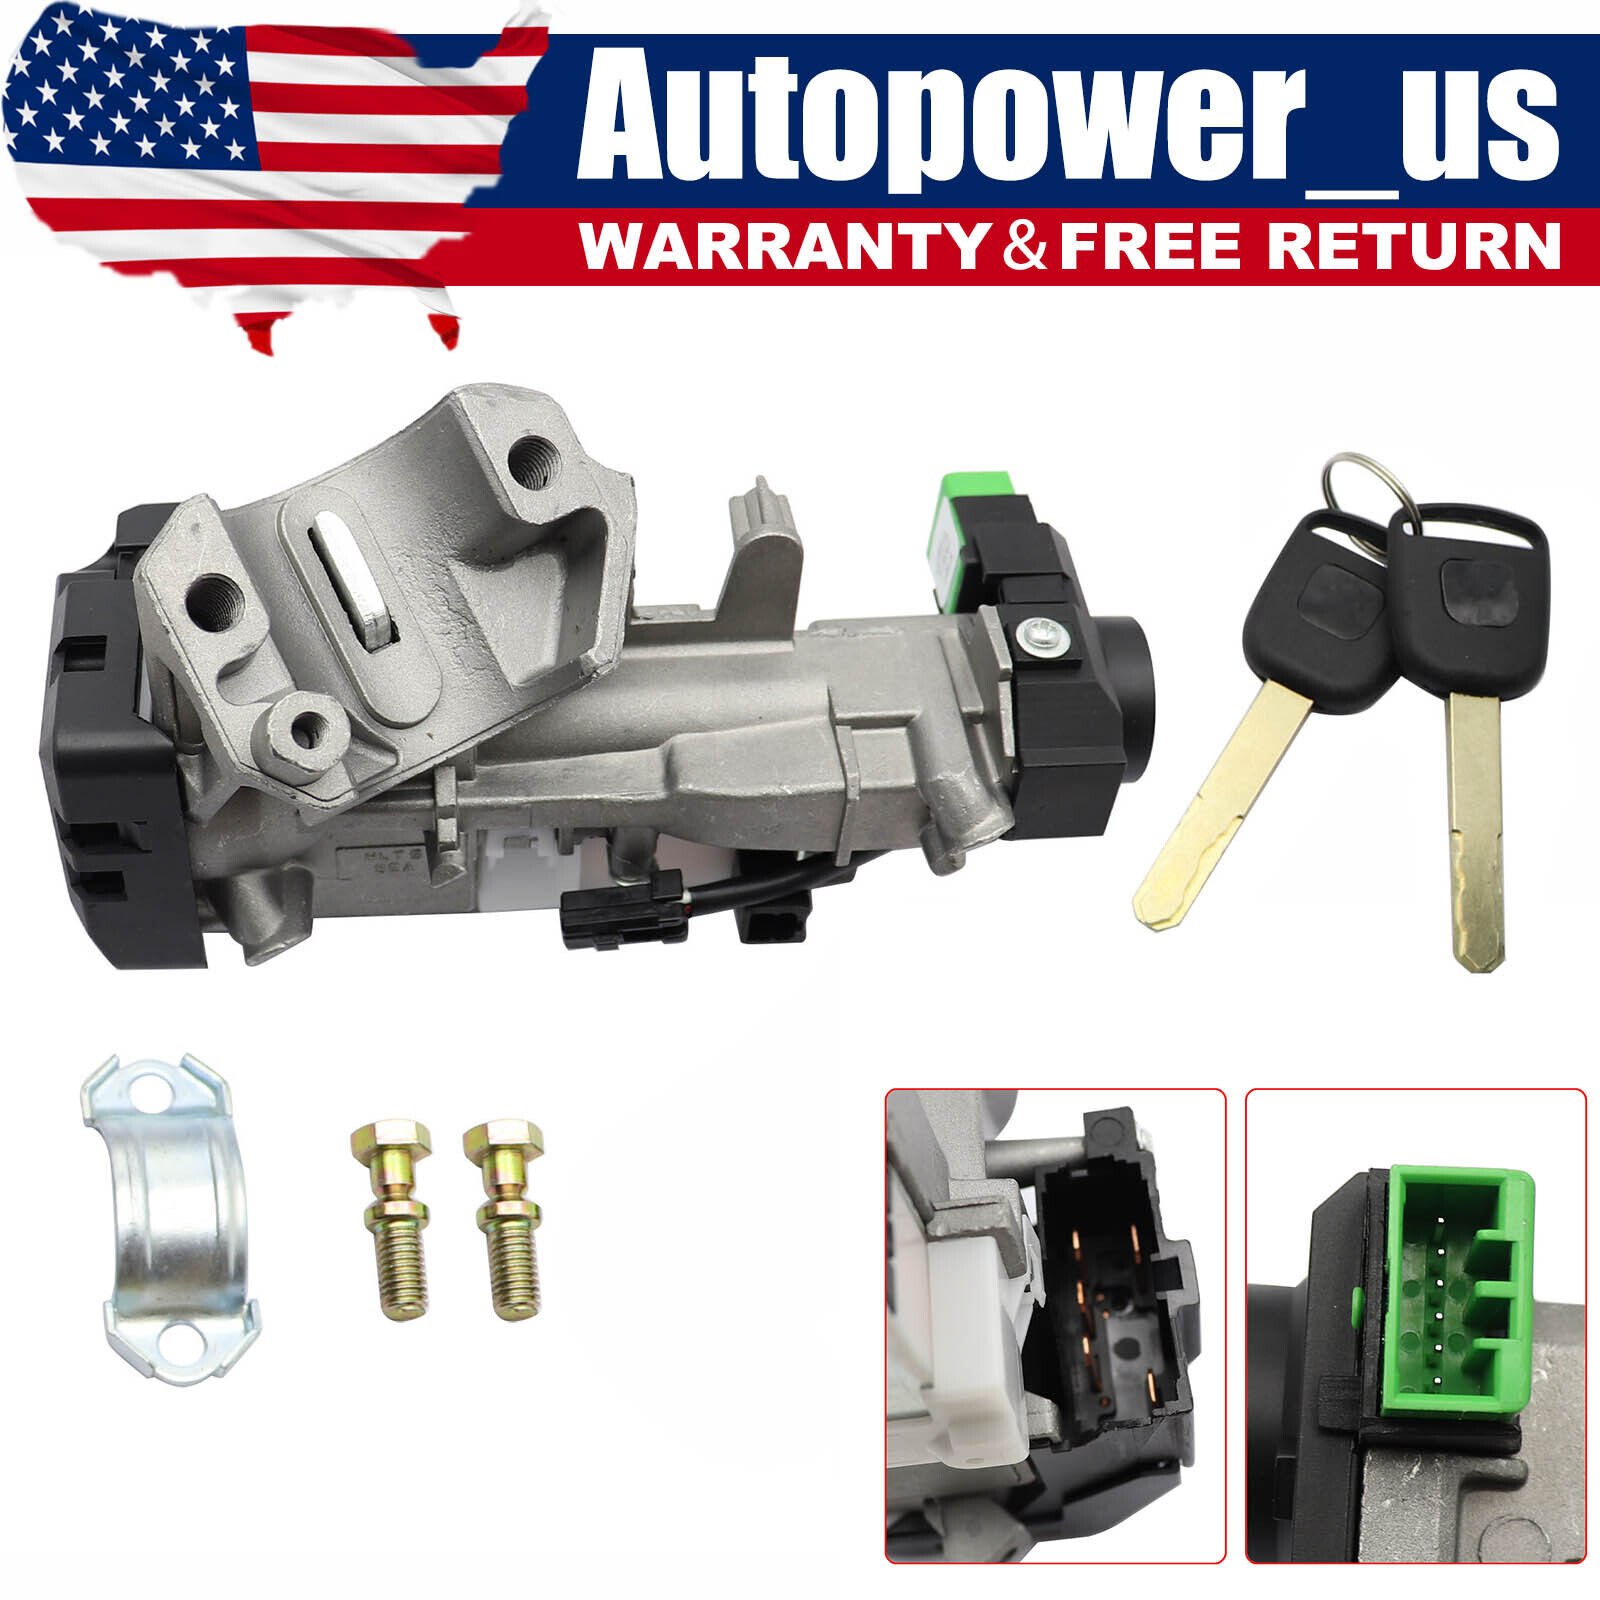 W/2 KEYS Ignition Switch Cylinder Lock Auto Trans For 2003-11 Honda Accord Civic